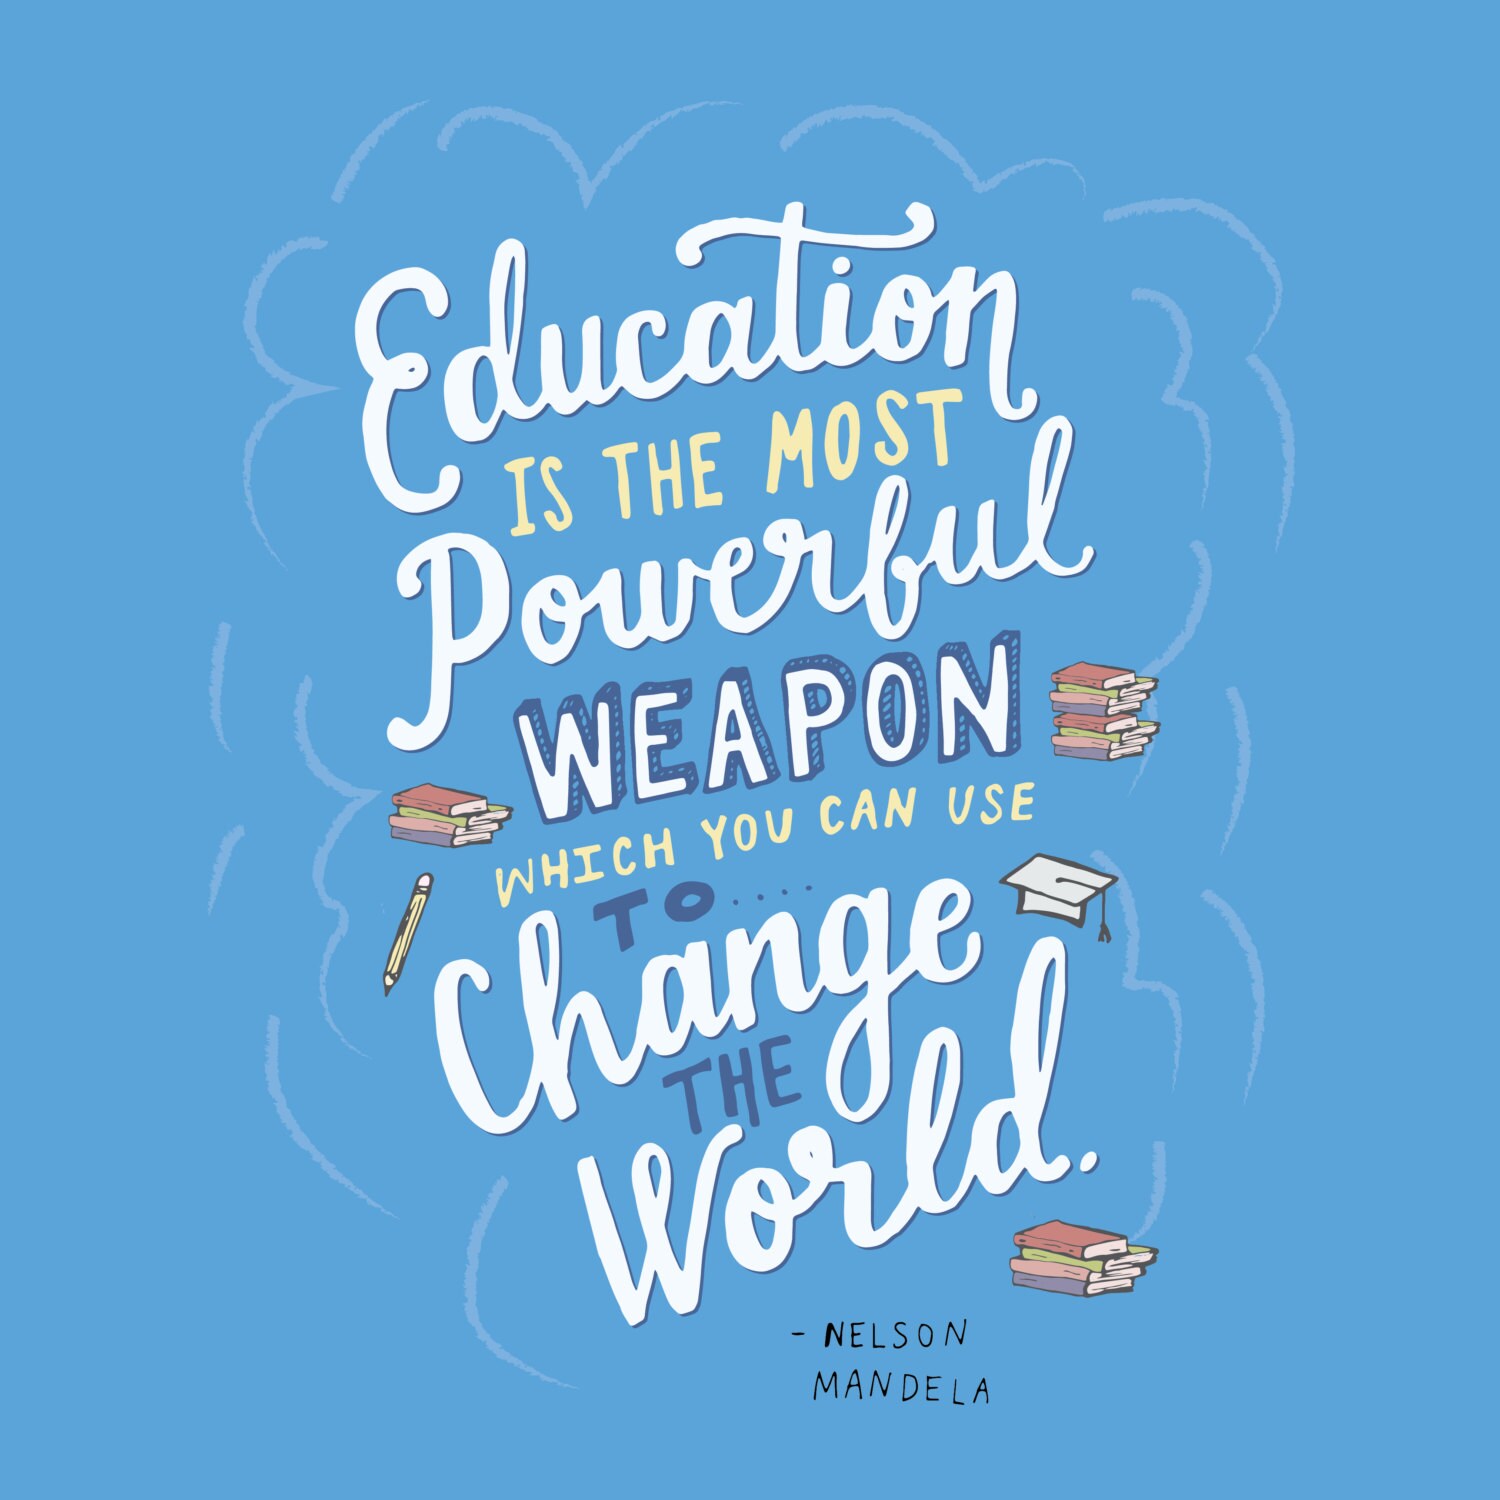 Education is the Most Powerful Weapon Nelson Mandela Hand - Etsy